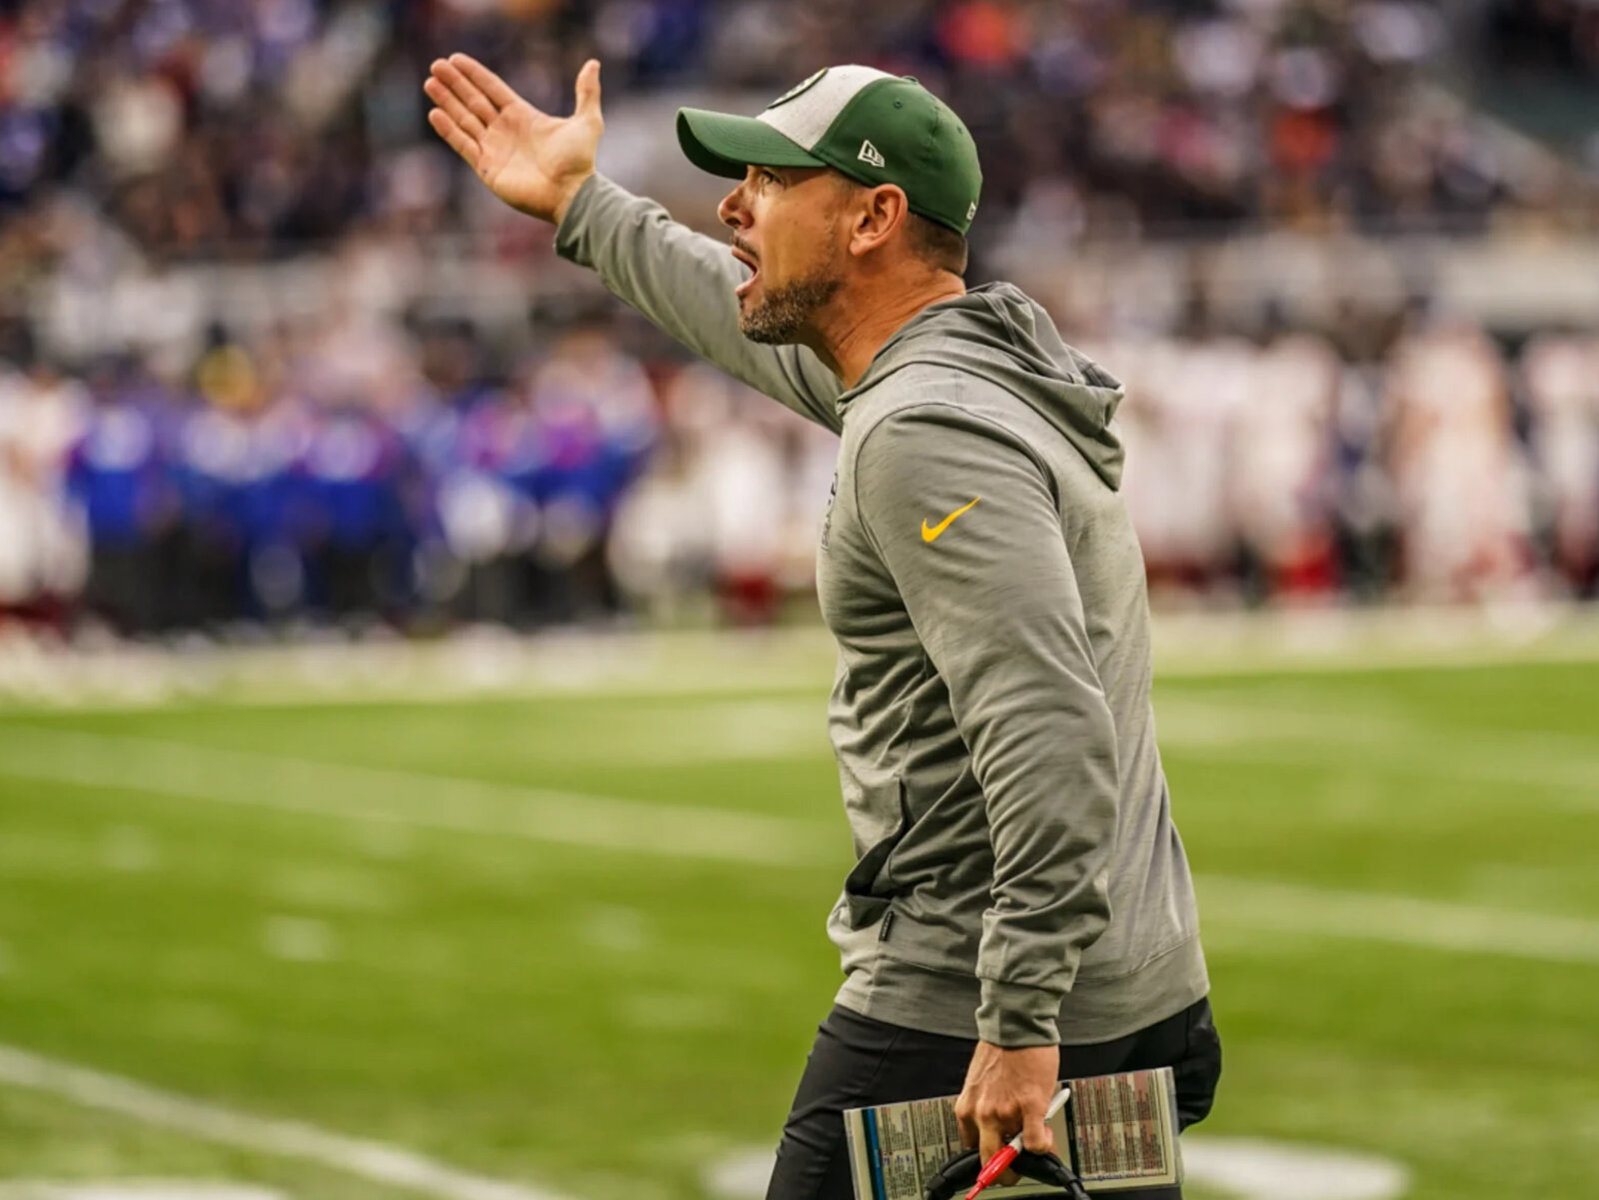 10 key images from the Packers' lame London loss to the Giants